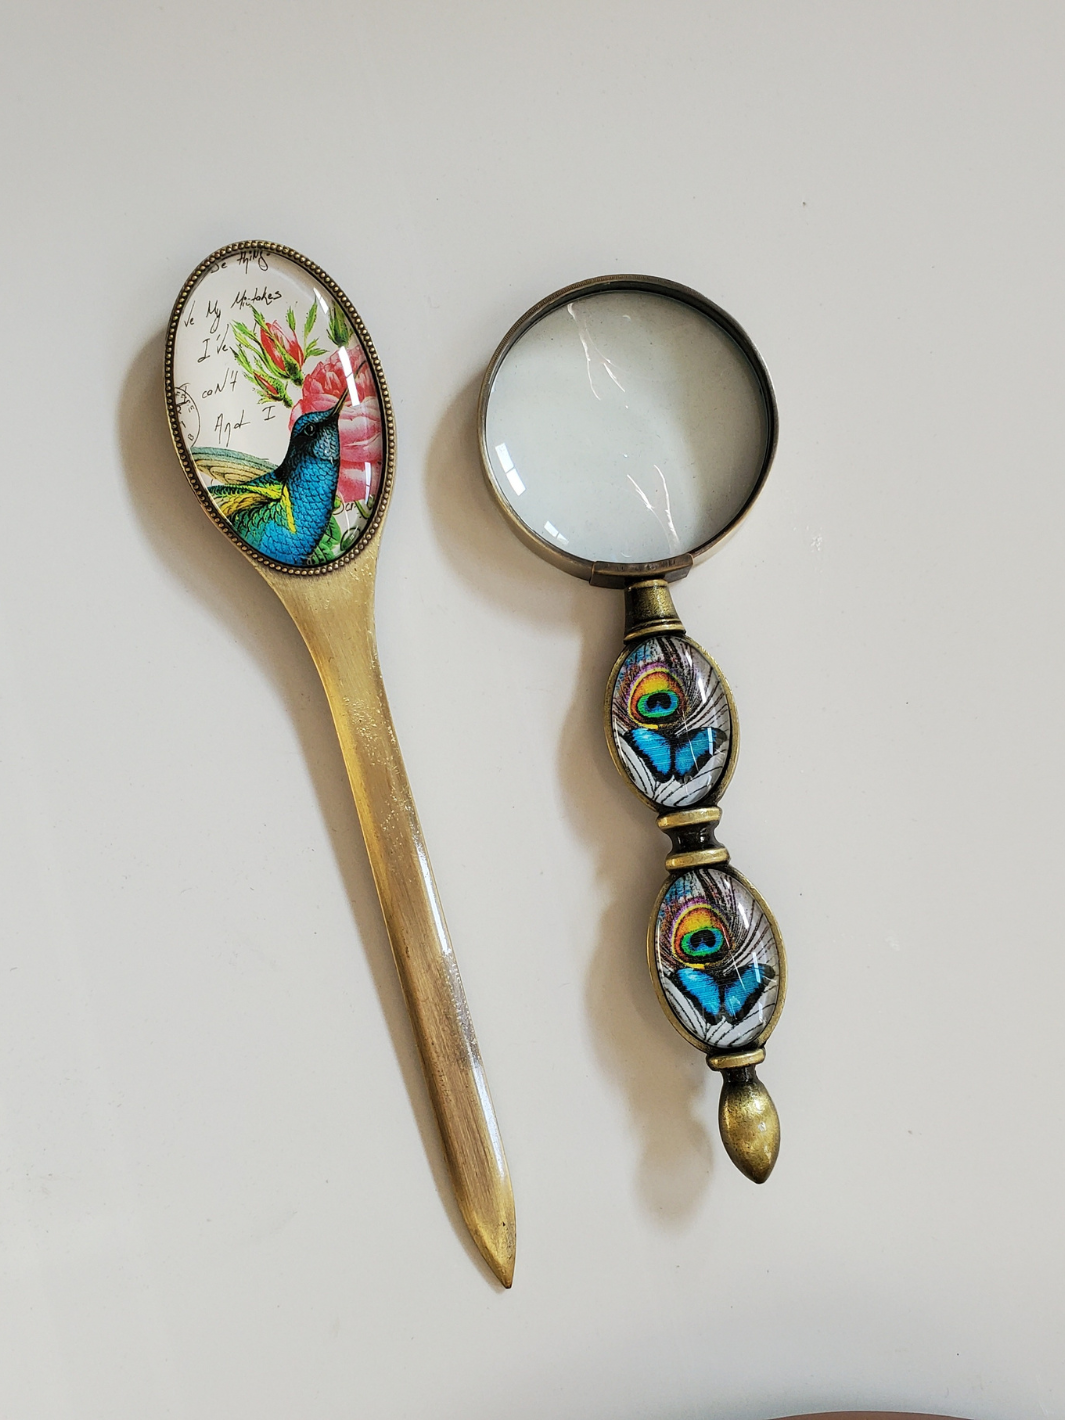 Blue Bird Letter Opener and Blue Butterfly Magnifier